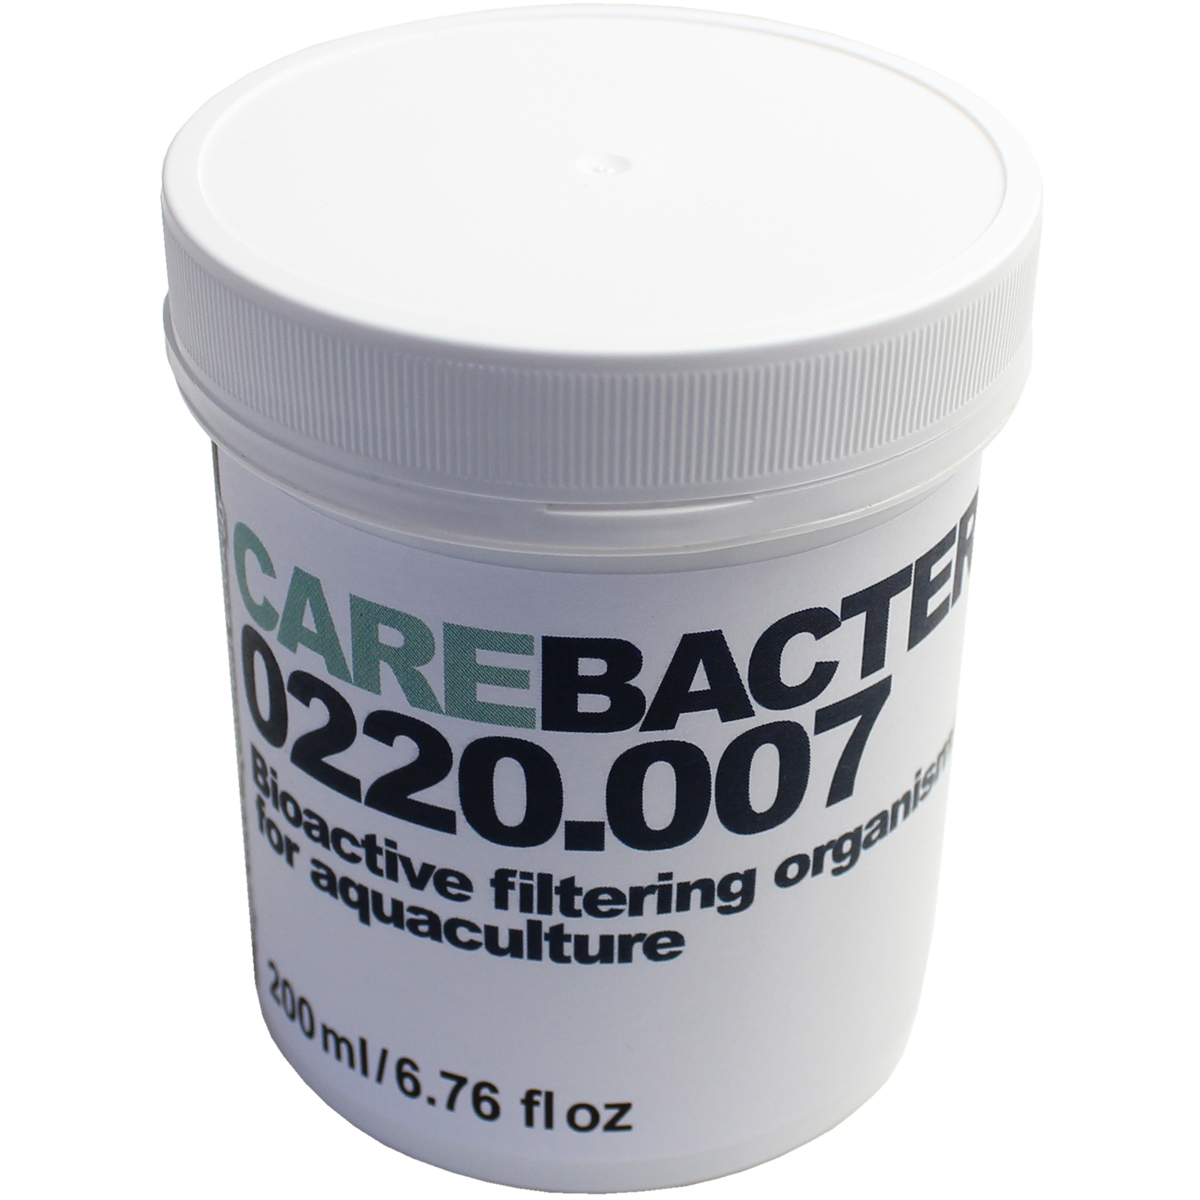 Care Bacter, 200ml